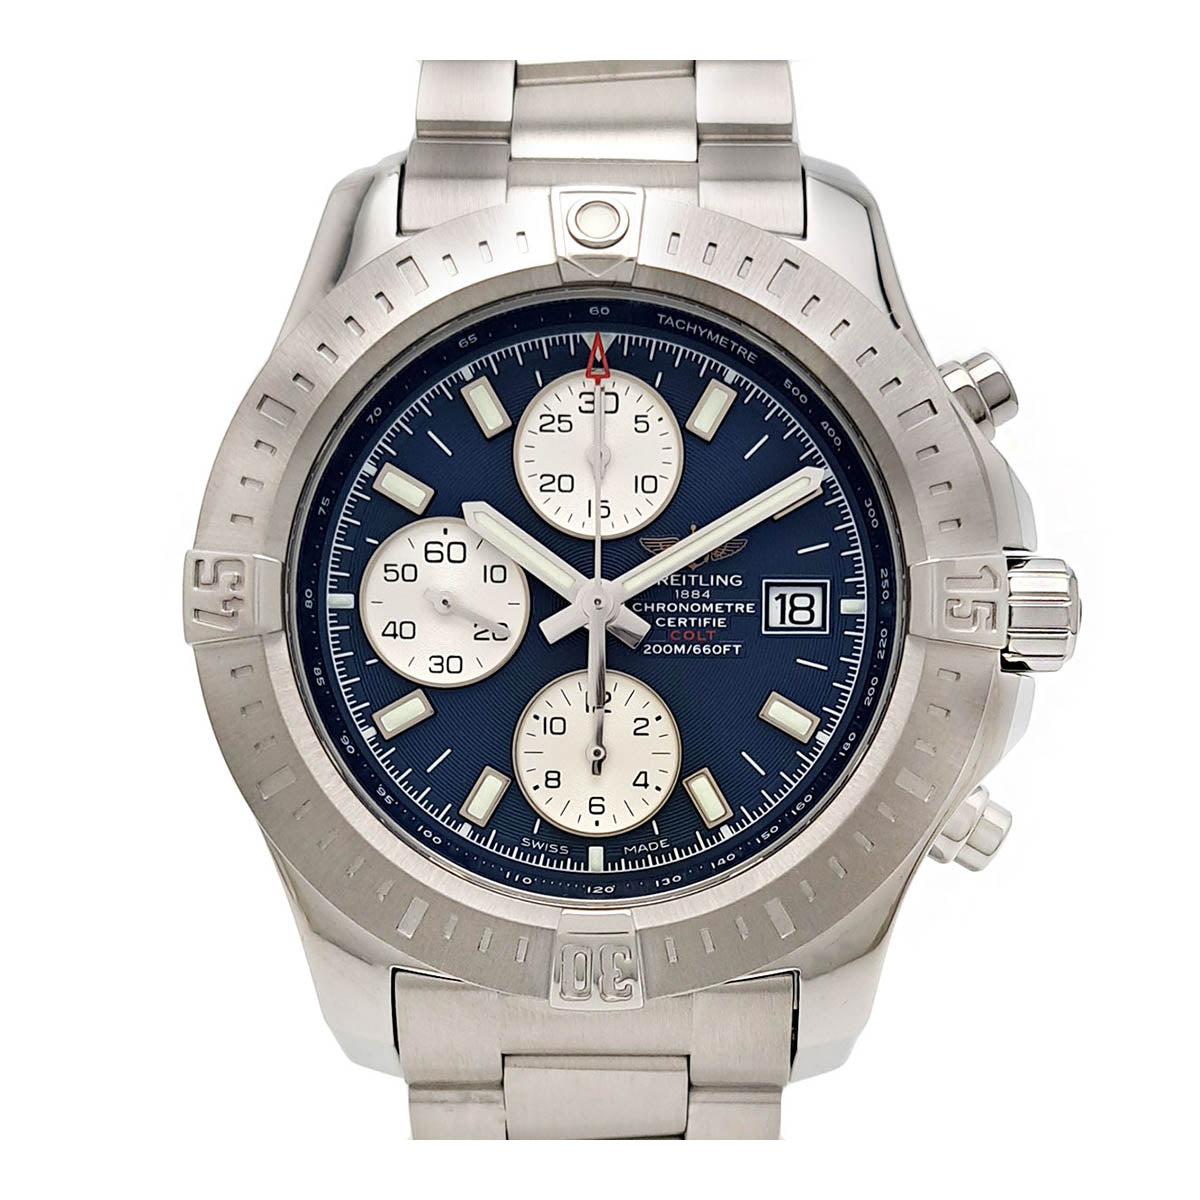 BREITLING Colt Chronograph Automatic A13388 Stainless Steel Men's Watch [Used] A13388